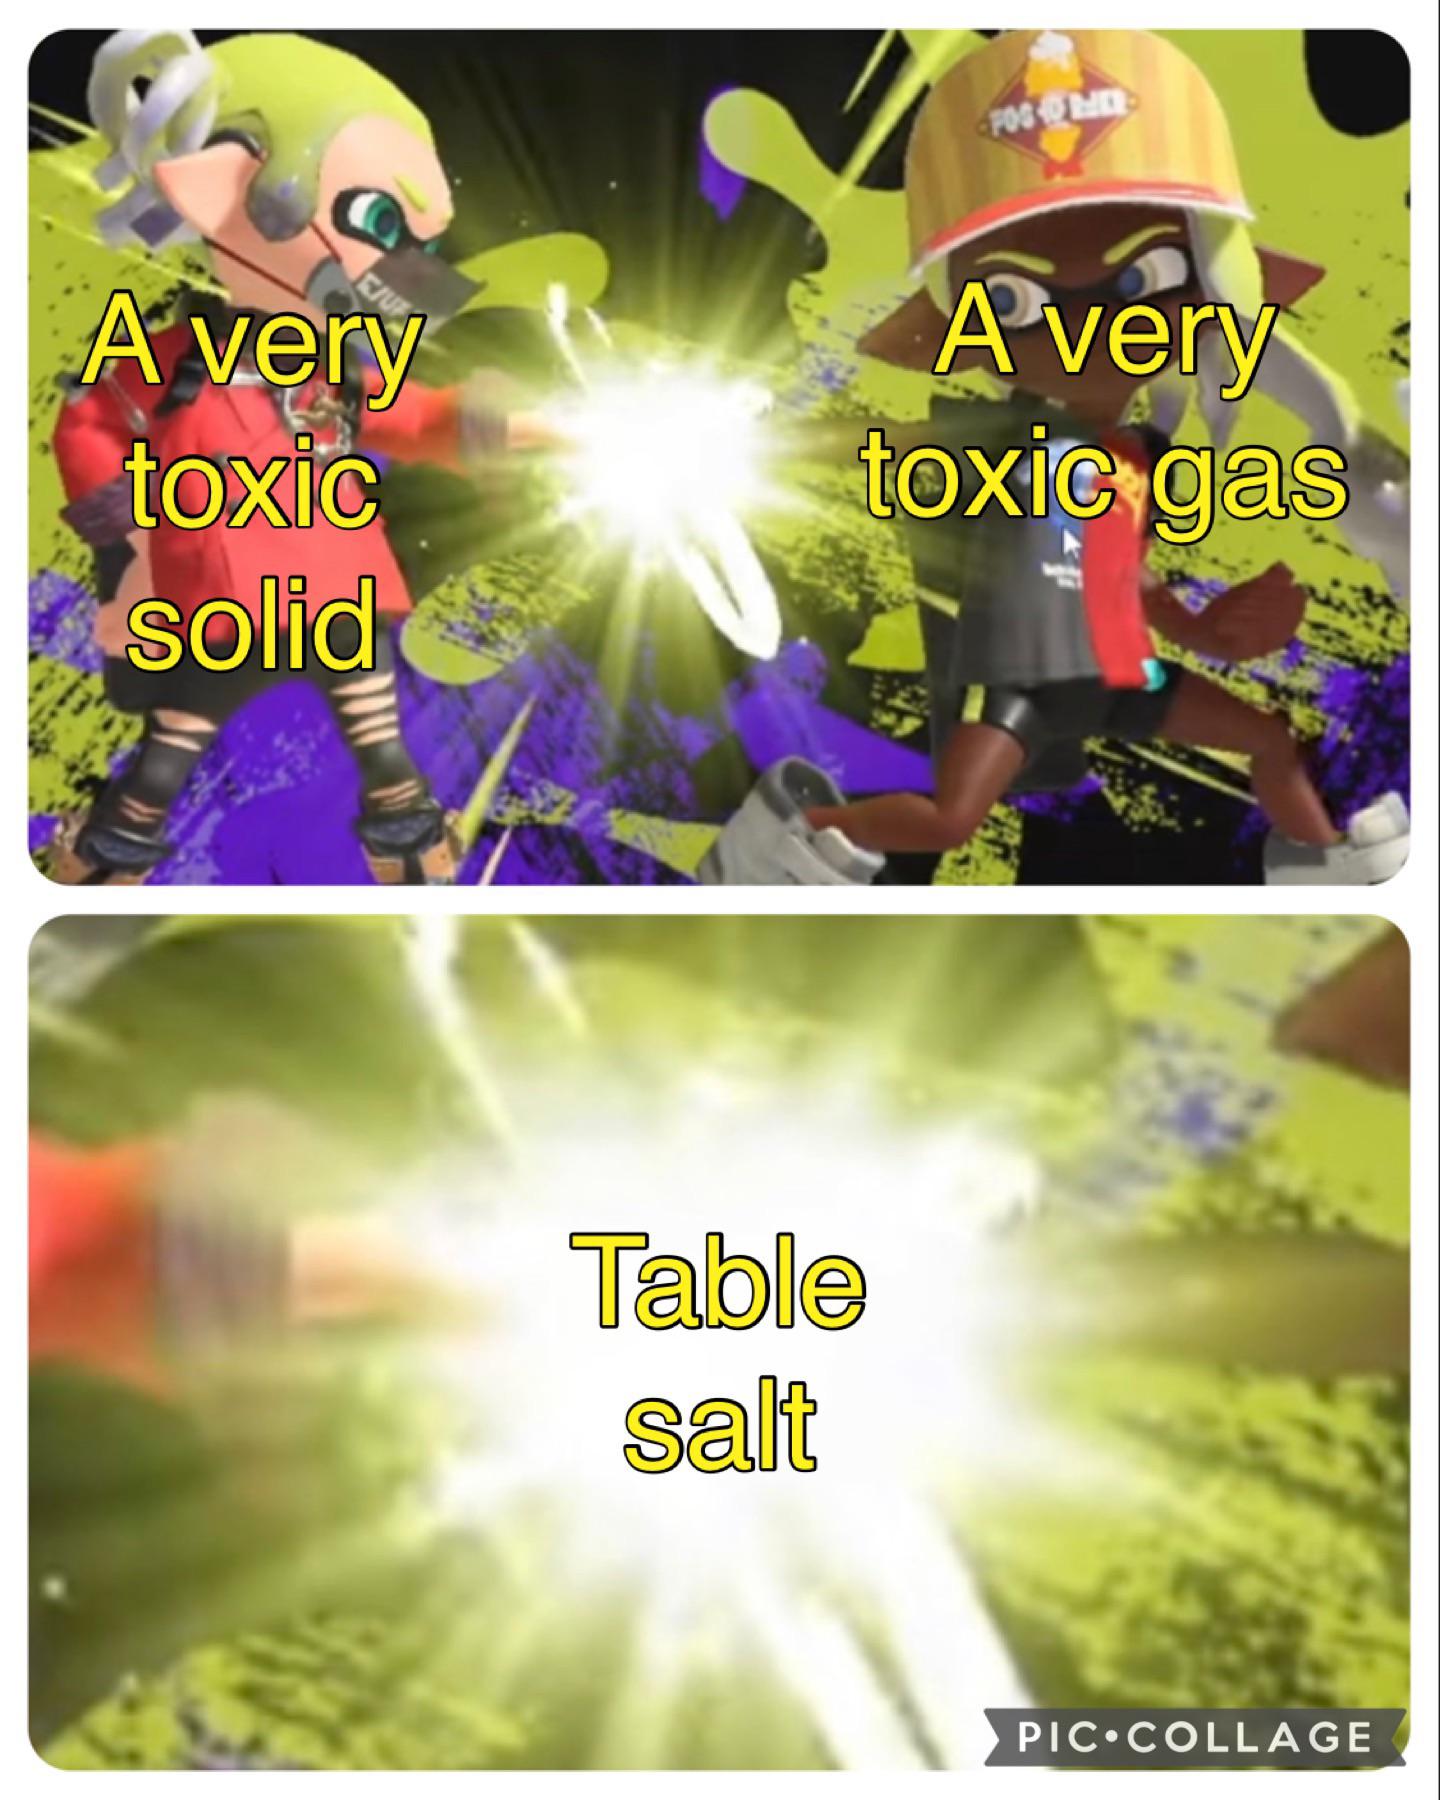 dank memes - graphic design - Ejur A very toxic solid Former A very toxic gas Table salt Pic Collage